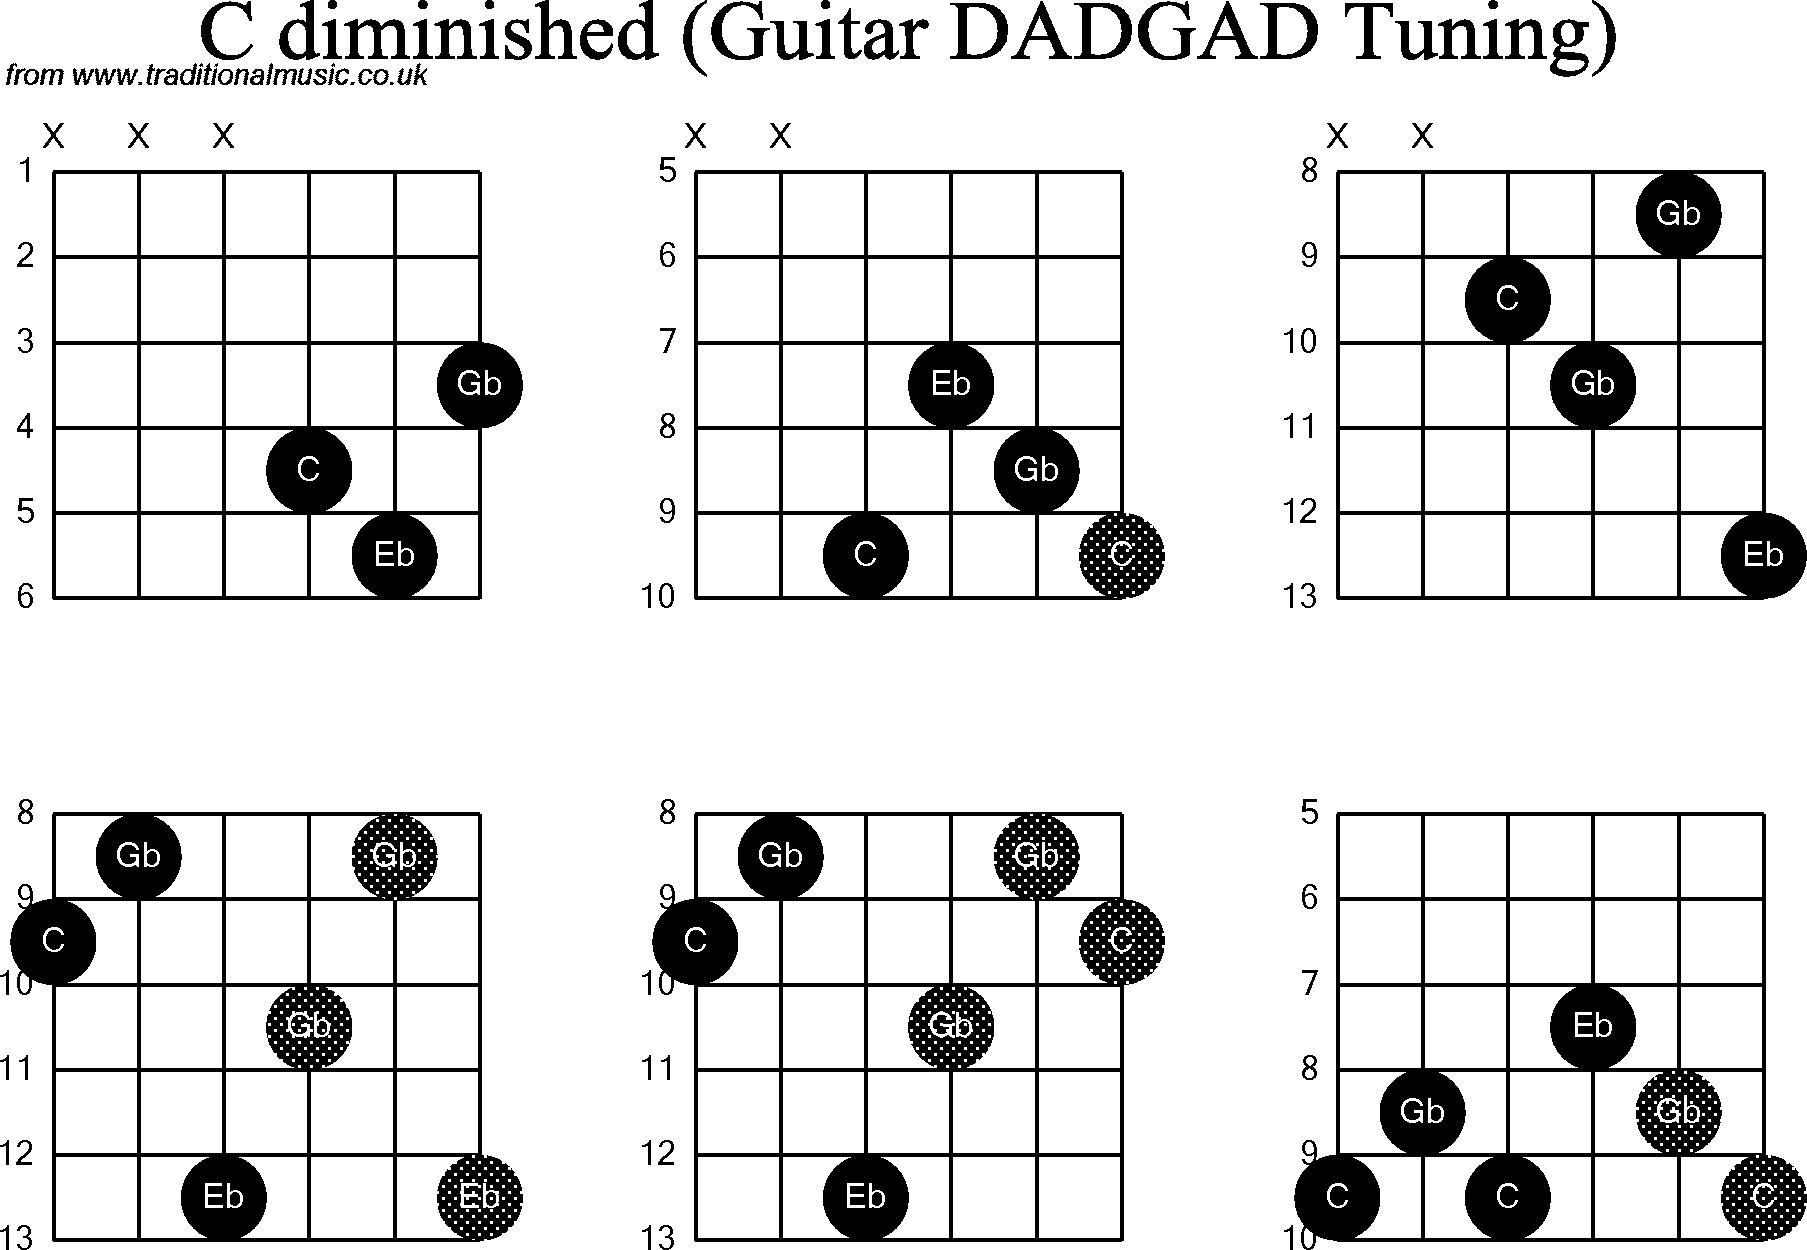 Chord Diagrams for D Modal Guitar(DADGAD), C Diminished